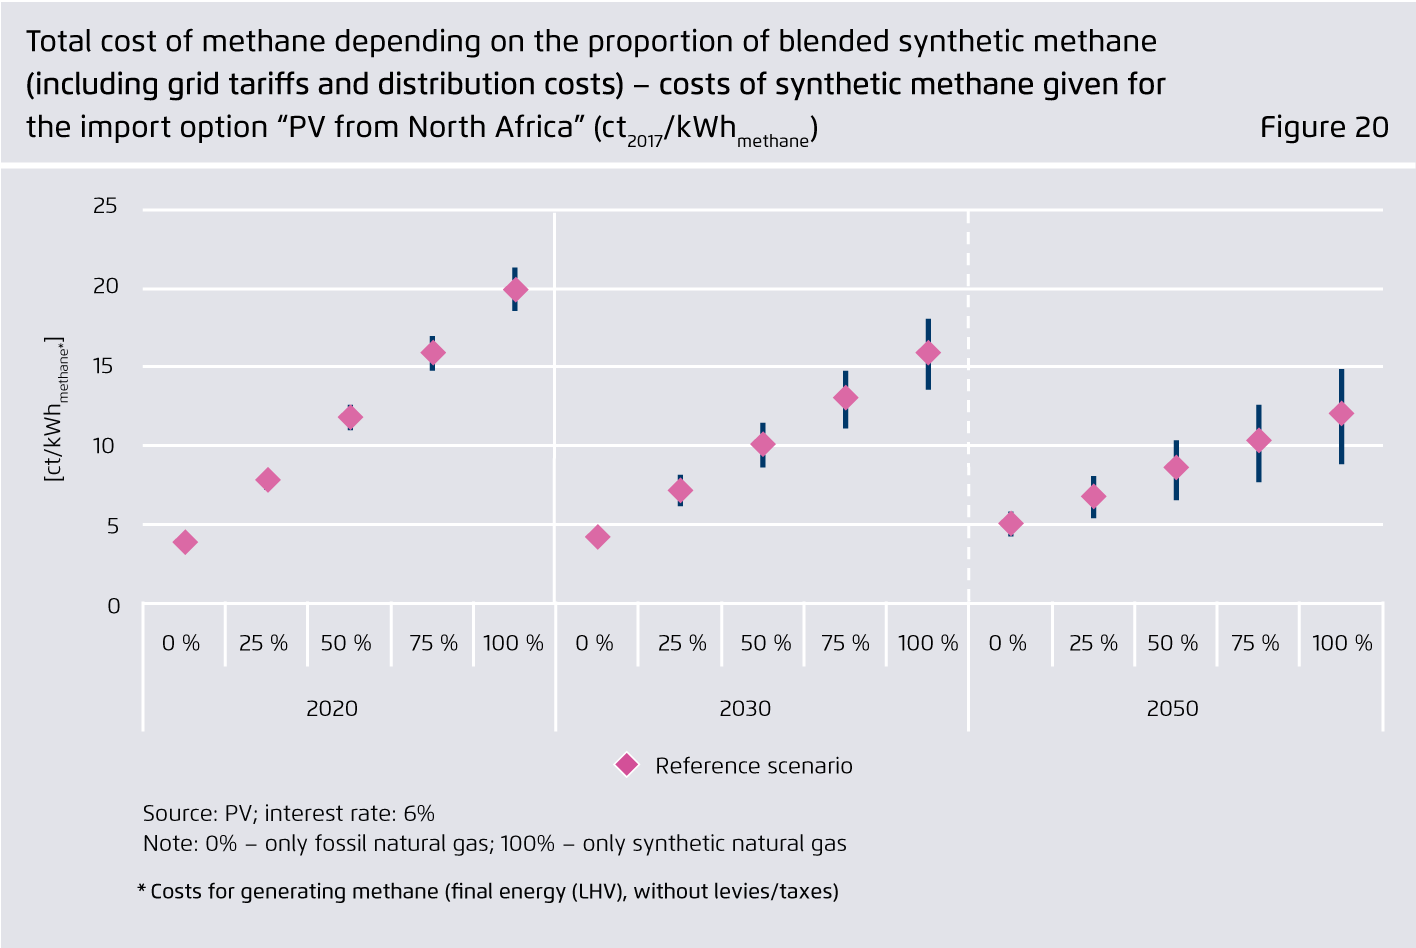 Preview for Total cost of methane depending on the proportion of blended synthetic methane (including grid tariffs and distribution costs) – costs of synthetic methane given for the import option “PV from North Africa” (ct2017/kWhmethane)